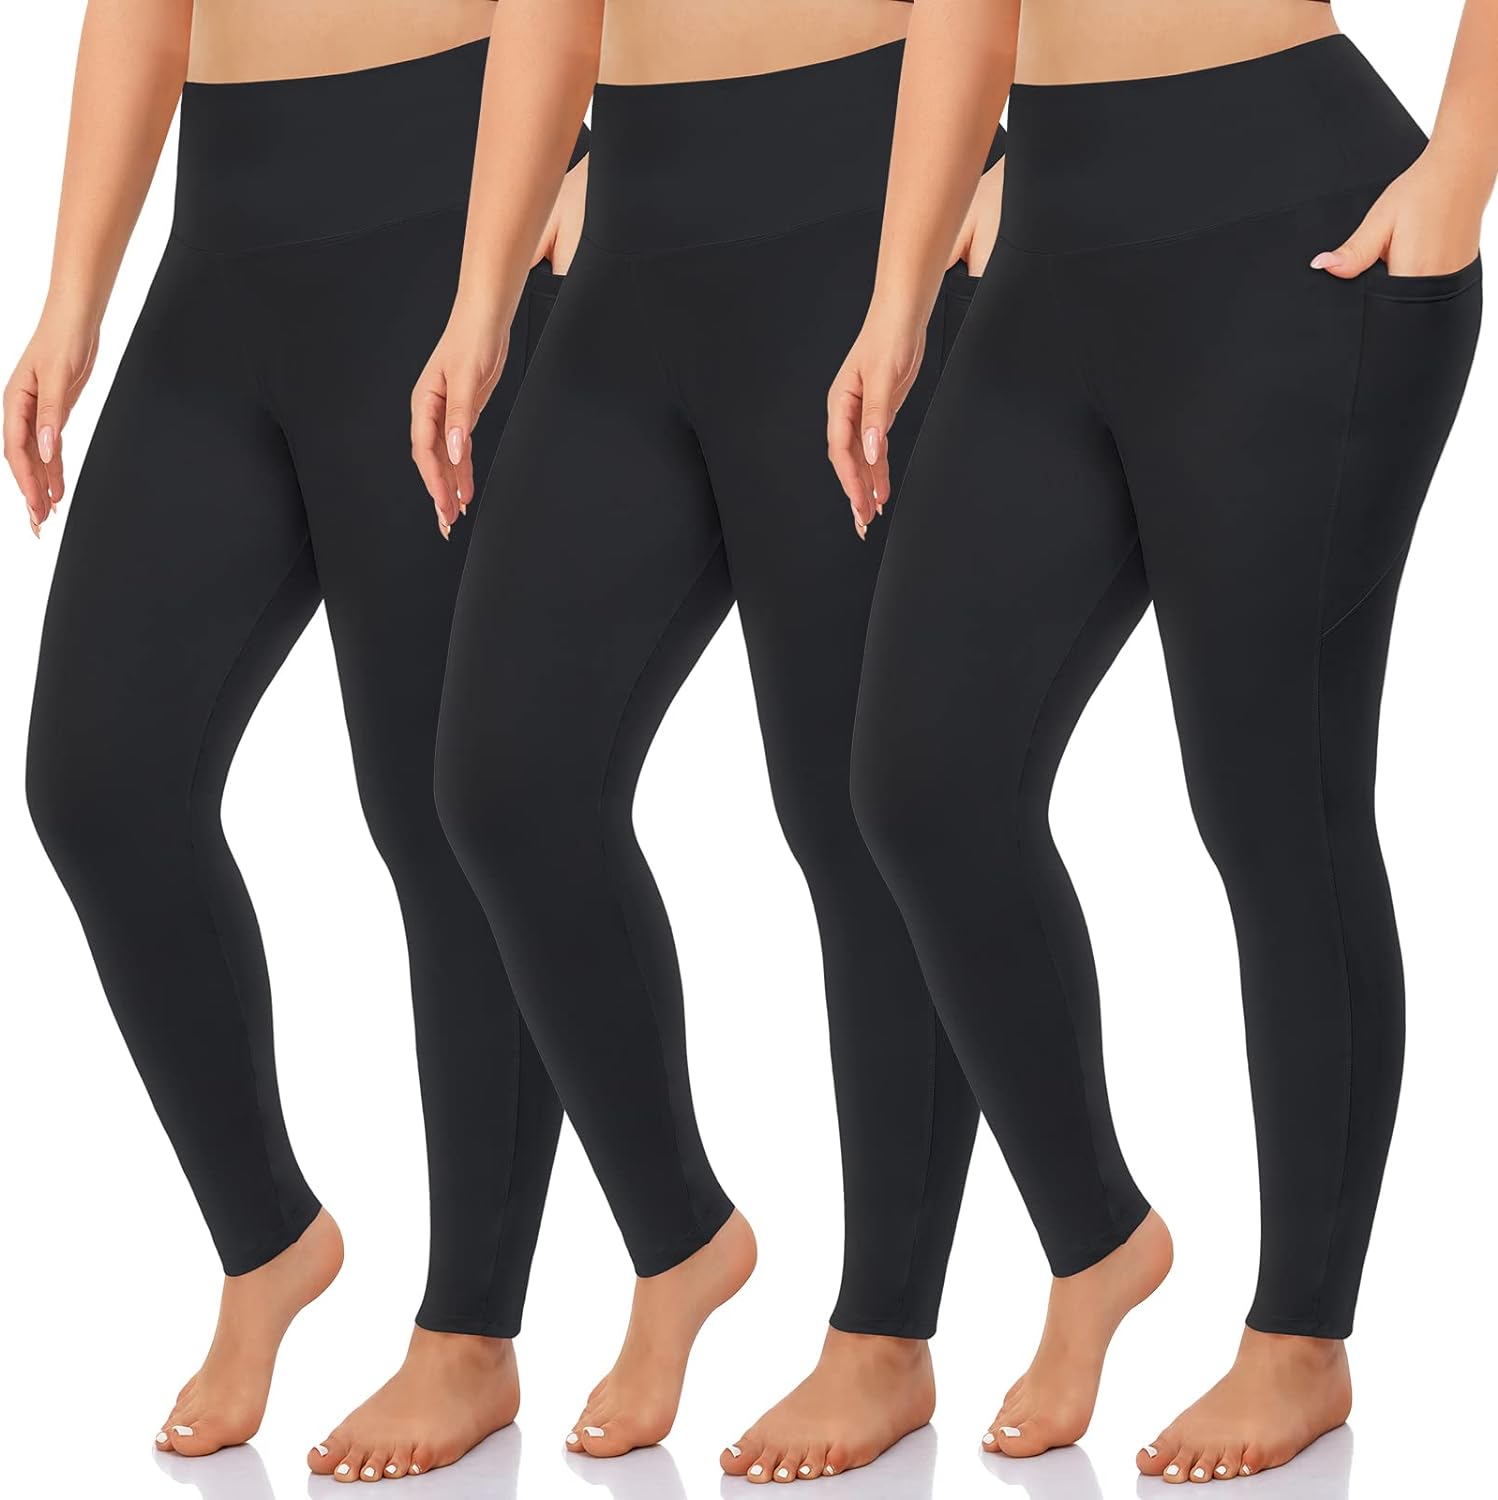 NEW YOUNG 3 Pack Plus Size Leggings with Pockets for Women,High Waist Tummy Control Workout Yoga Pants